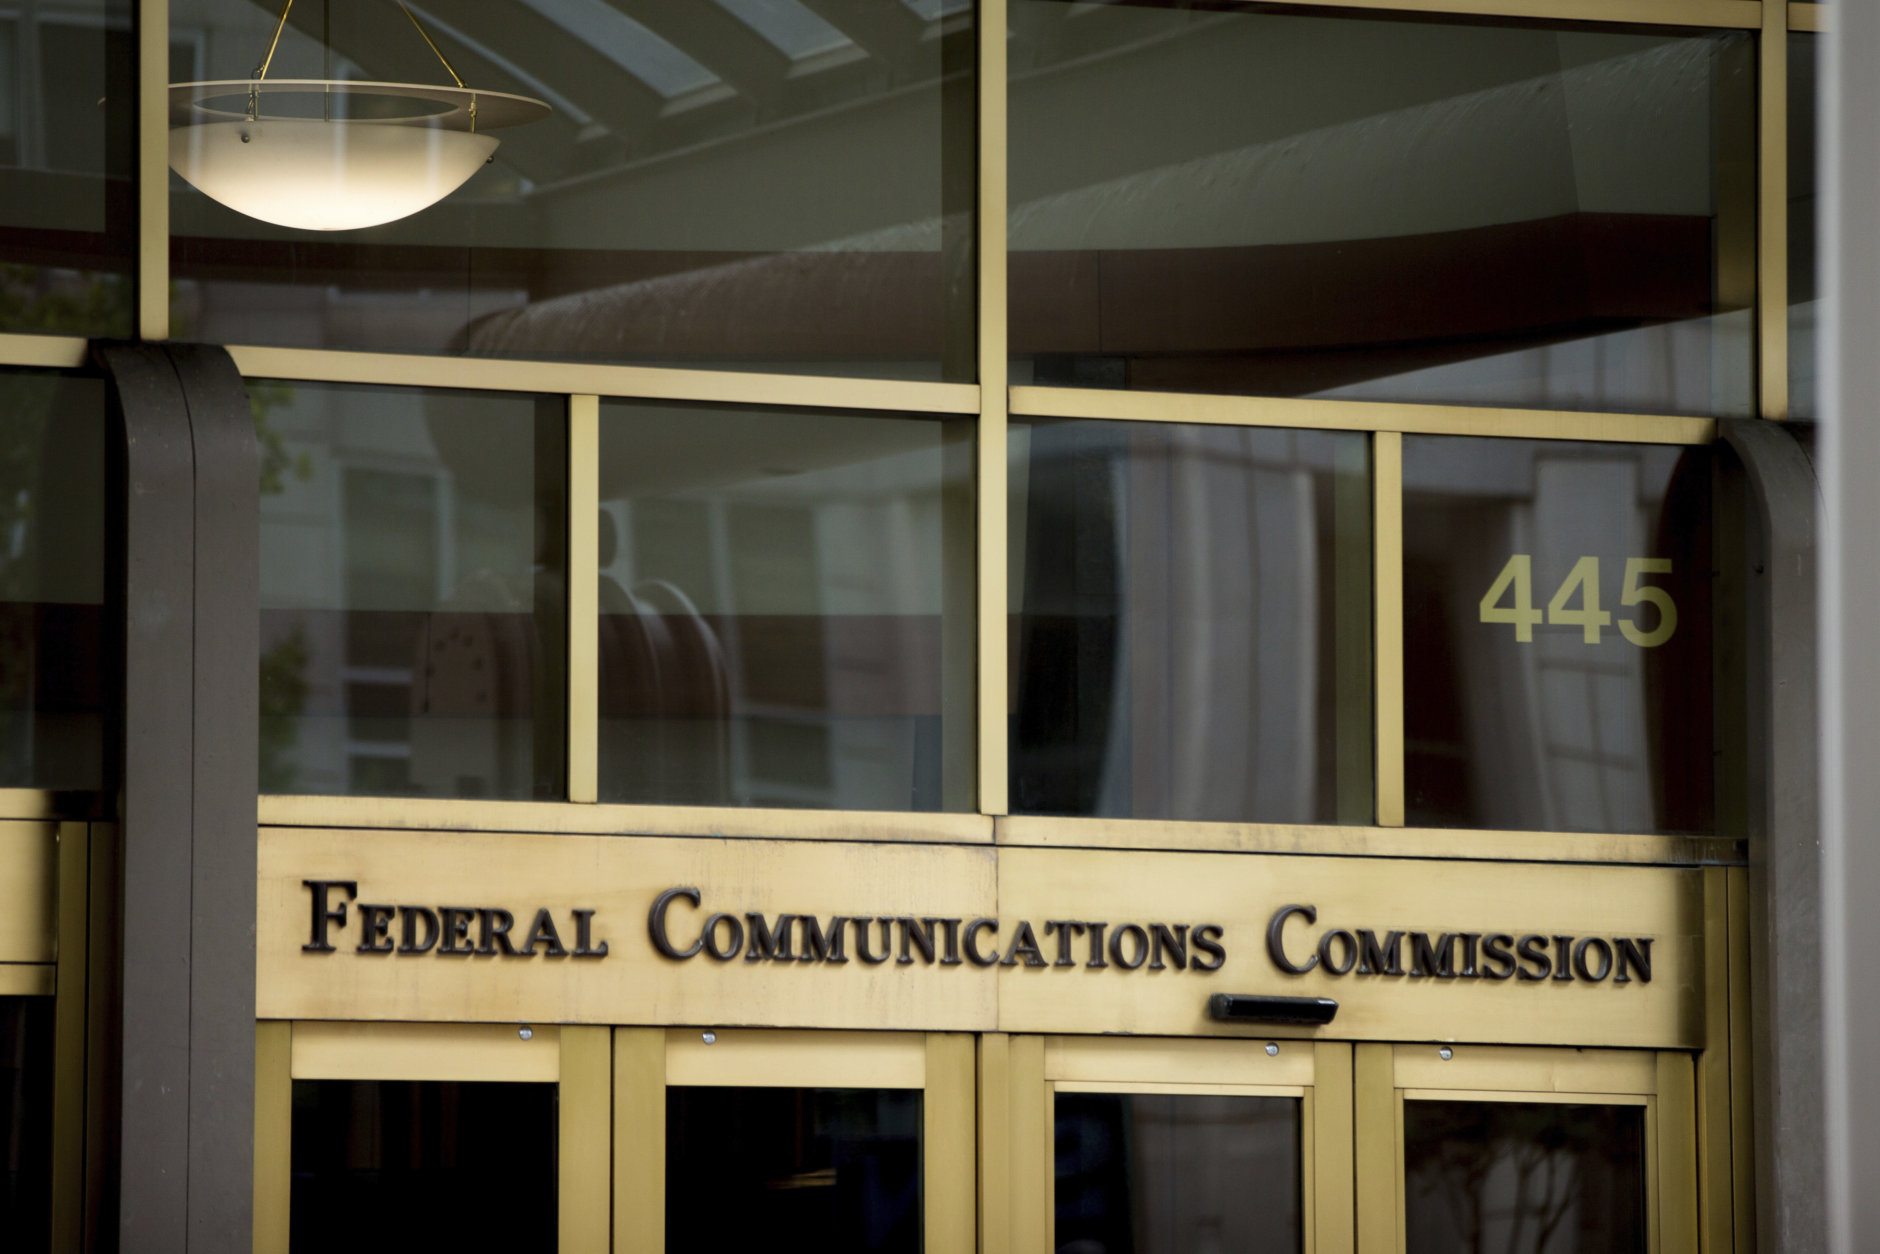 FILE - This June 19, 2015, file photo, shows the Federal Communications Commission building in Washington. On Tuesday, April 25, 2017, an appeals court upheld "net neutrality" rules that treat the internet like a public utility and prohibit blocking, slowing and creating paid fast lanes for online traffic. They have been in effect for a year. The ruling cements the FCC's authority to regulate the internet more strictly. The agency has already proposed making it harder for broadband providers to use consumer data for advertising purposes. (AP Photo/Andrew Harnik, File)